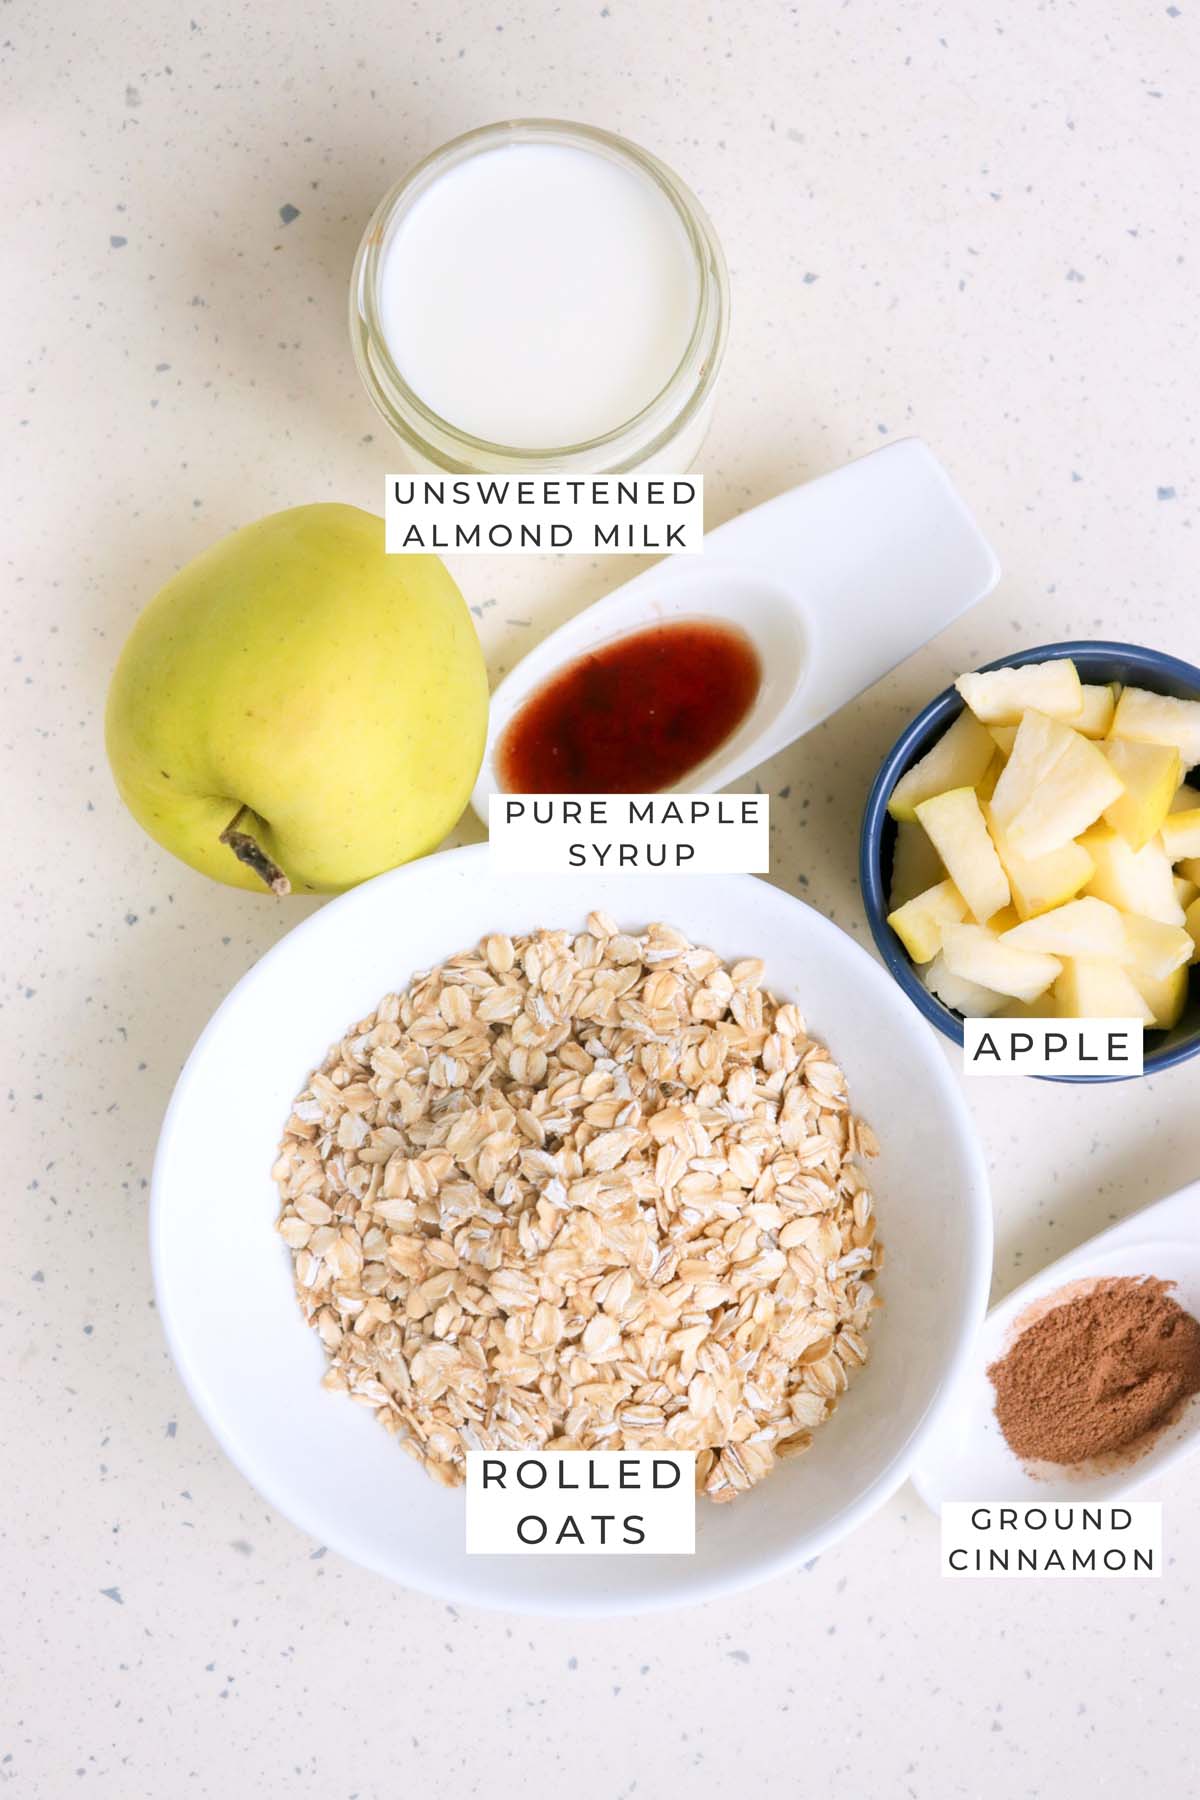 Labeled ingredients for the oatmeal.